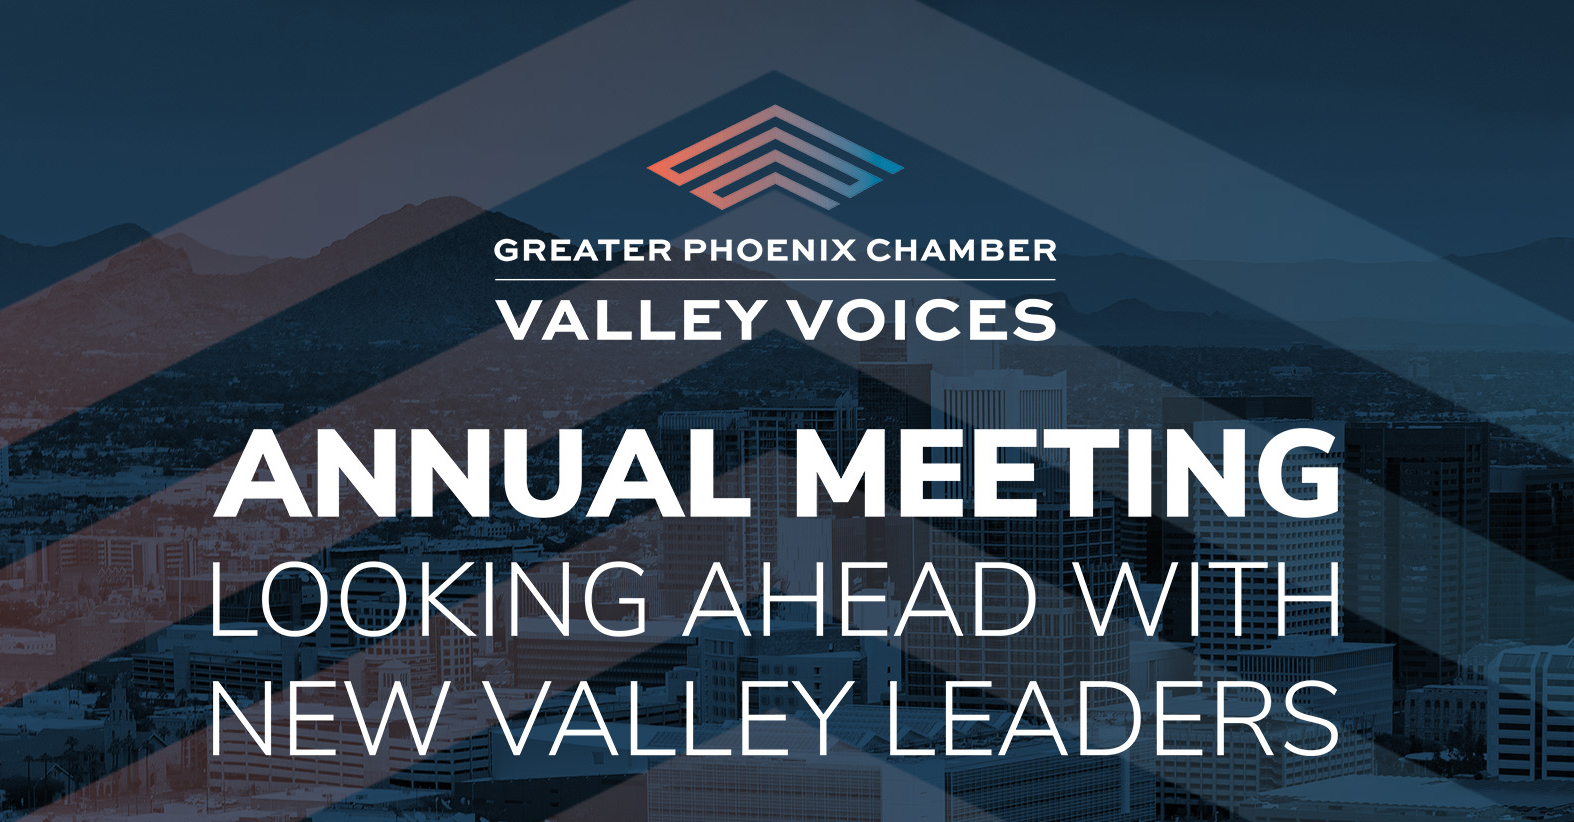 Chamber to hold annual meeting